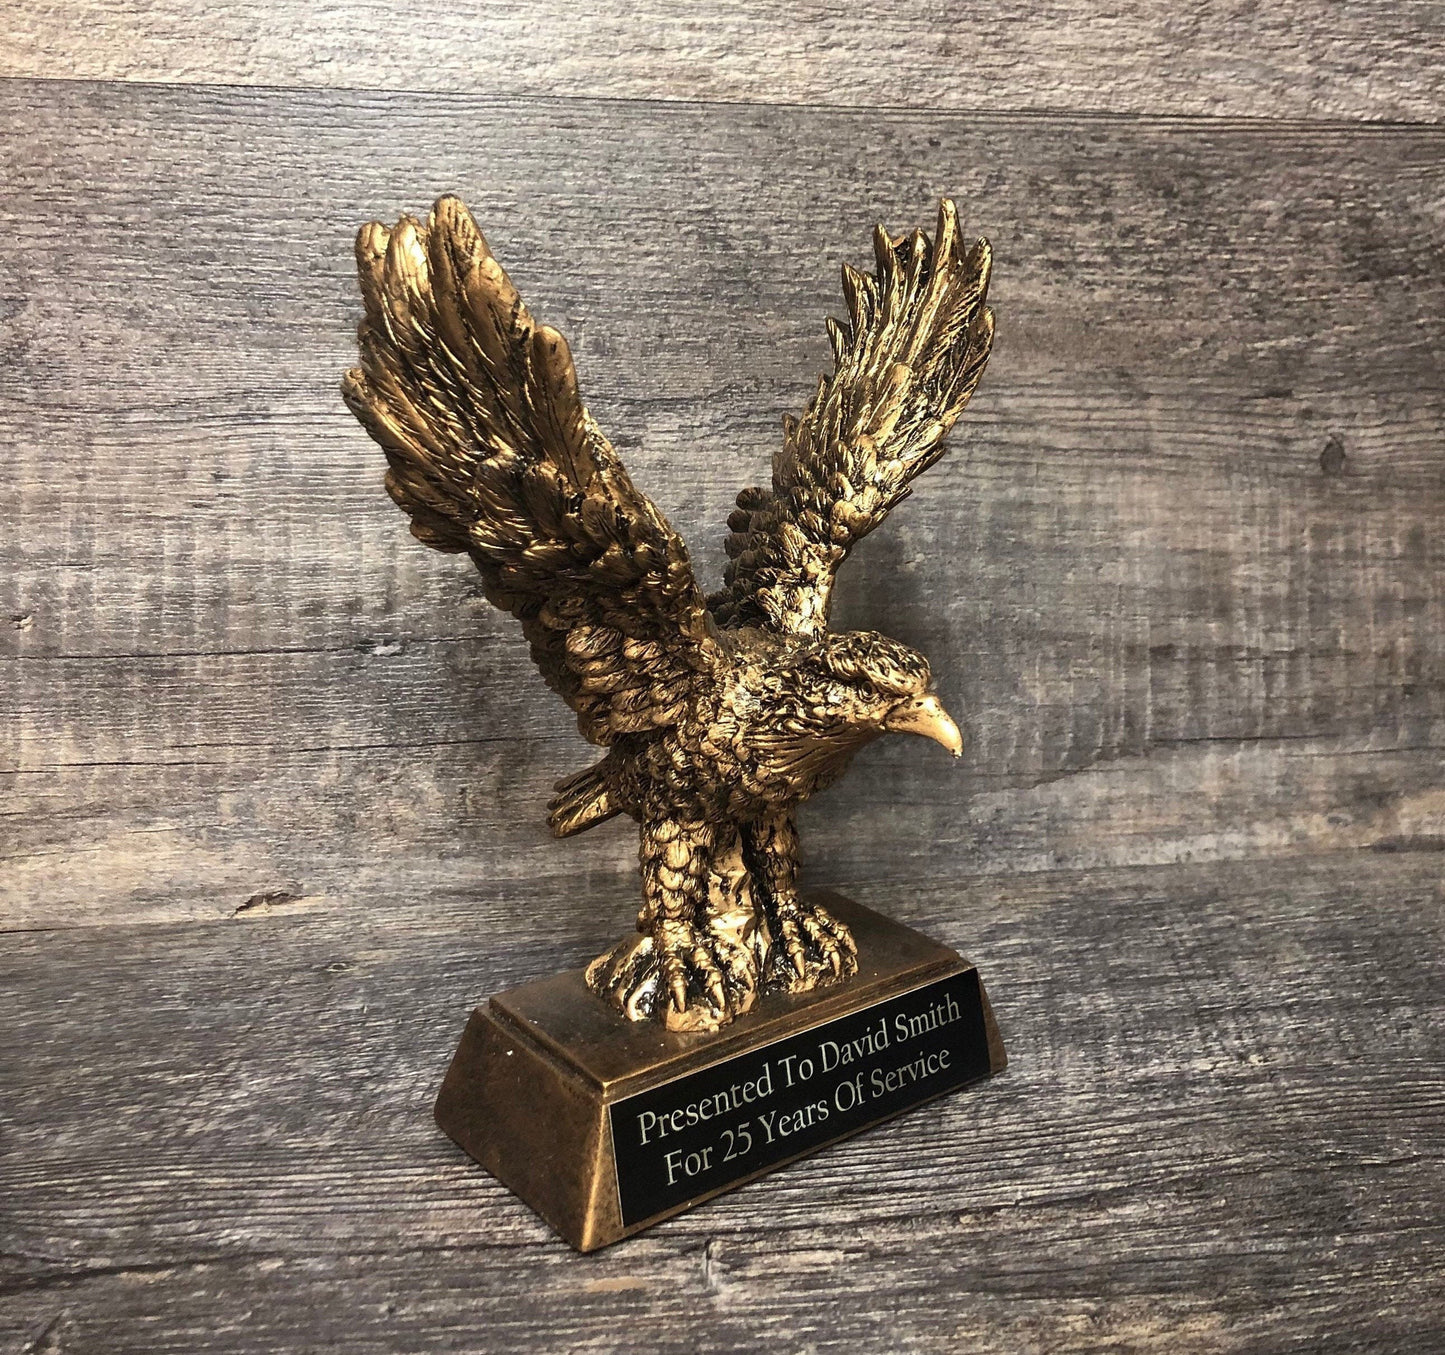 Eagle Trophy Sculpture Retirement Achievement Award Victory Trophy Years Of Service Military Thank You Gift Appreciation Award Top Sales